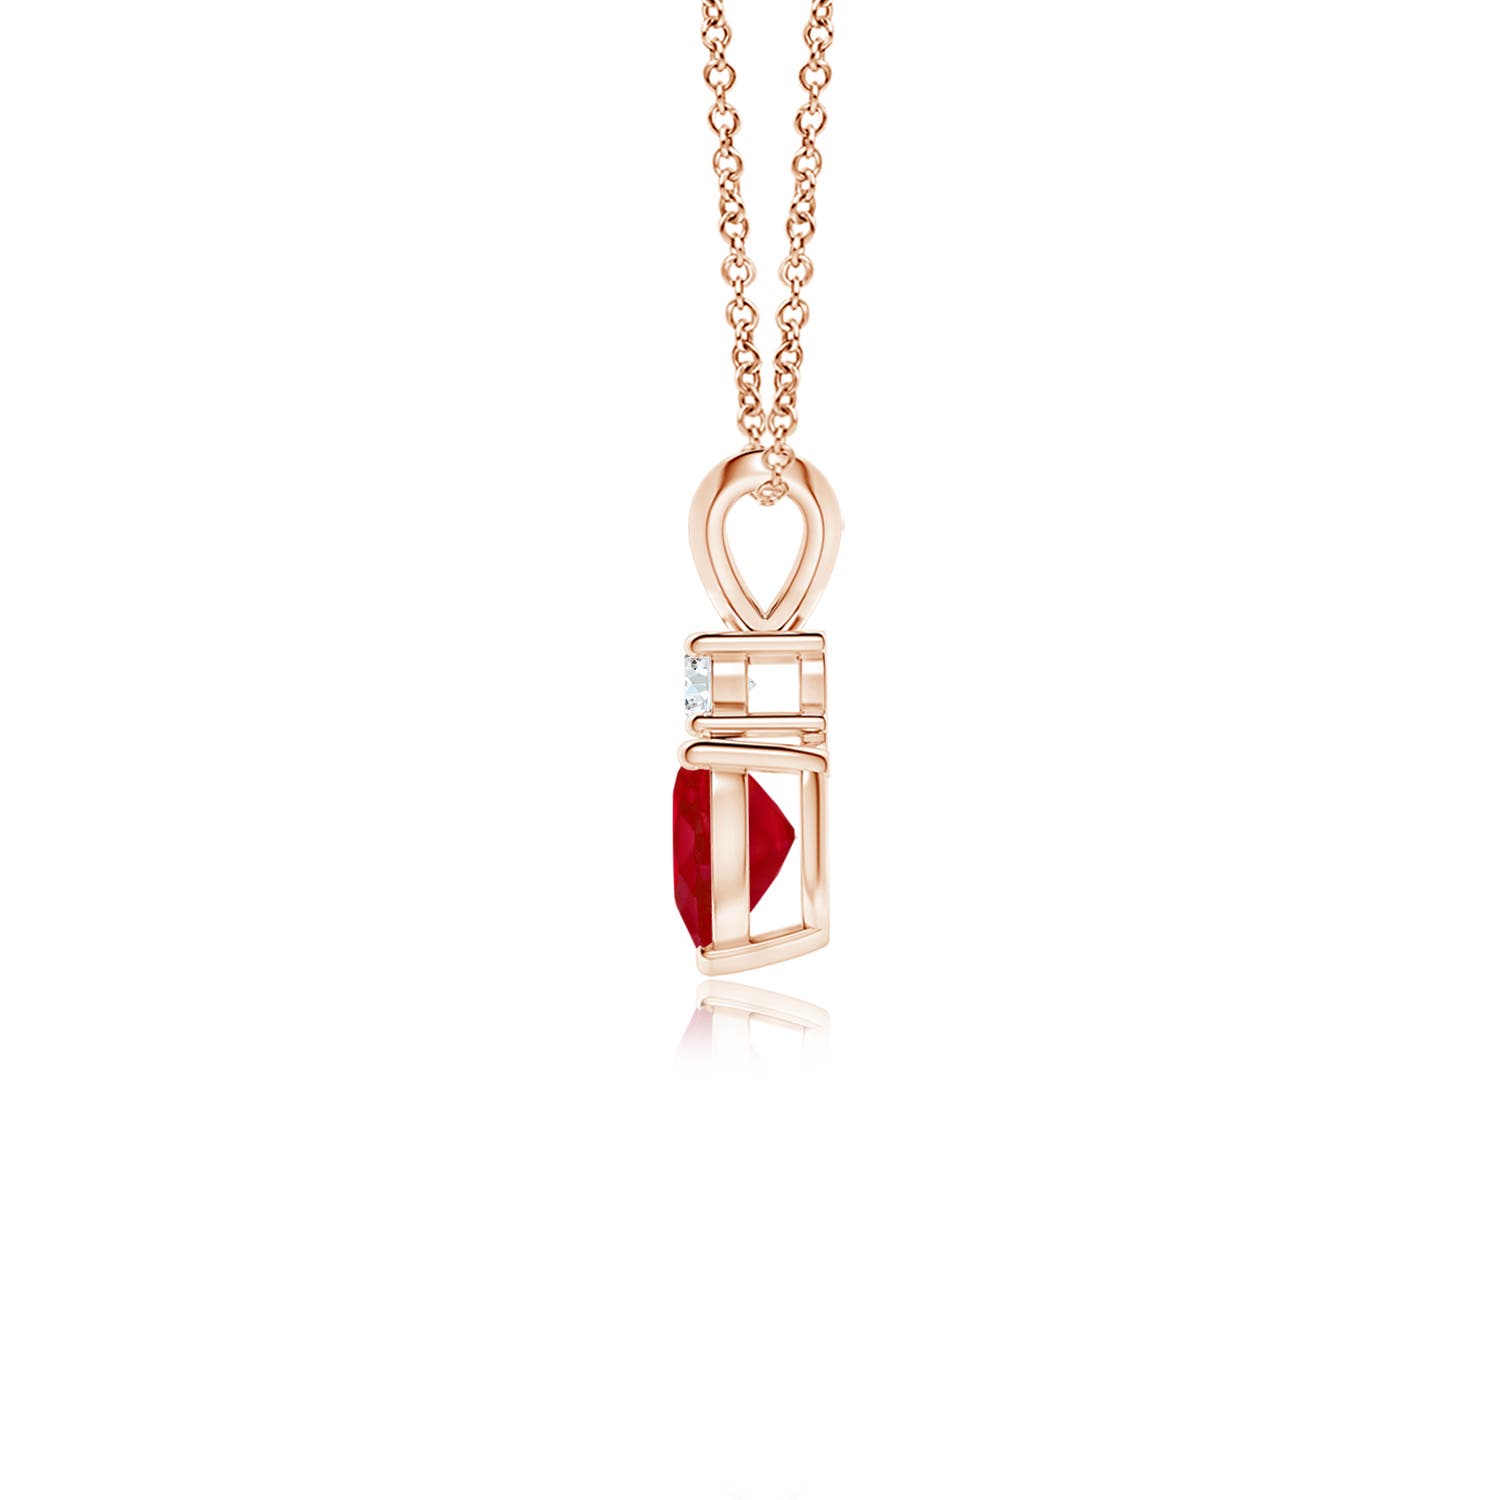 AA - Ruby / 0.59 CT / 14 KT Rose Gold